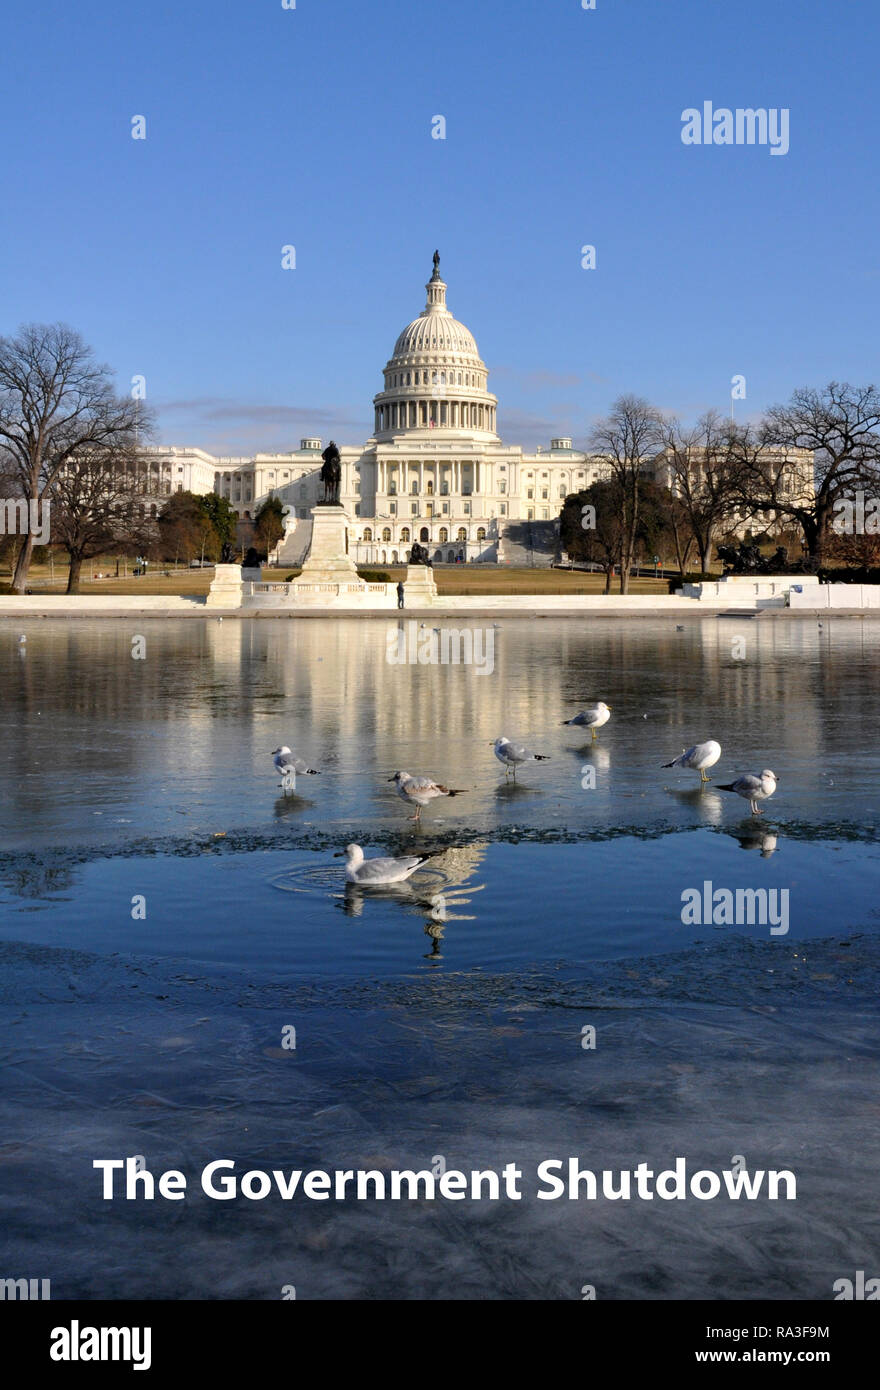 Frozen Government Shutdown Political Satire showing the US Capitol with Iced Reflecting Pool and Seagulls, Washington DC, Winter, January 15, 2018 Stock Photo